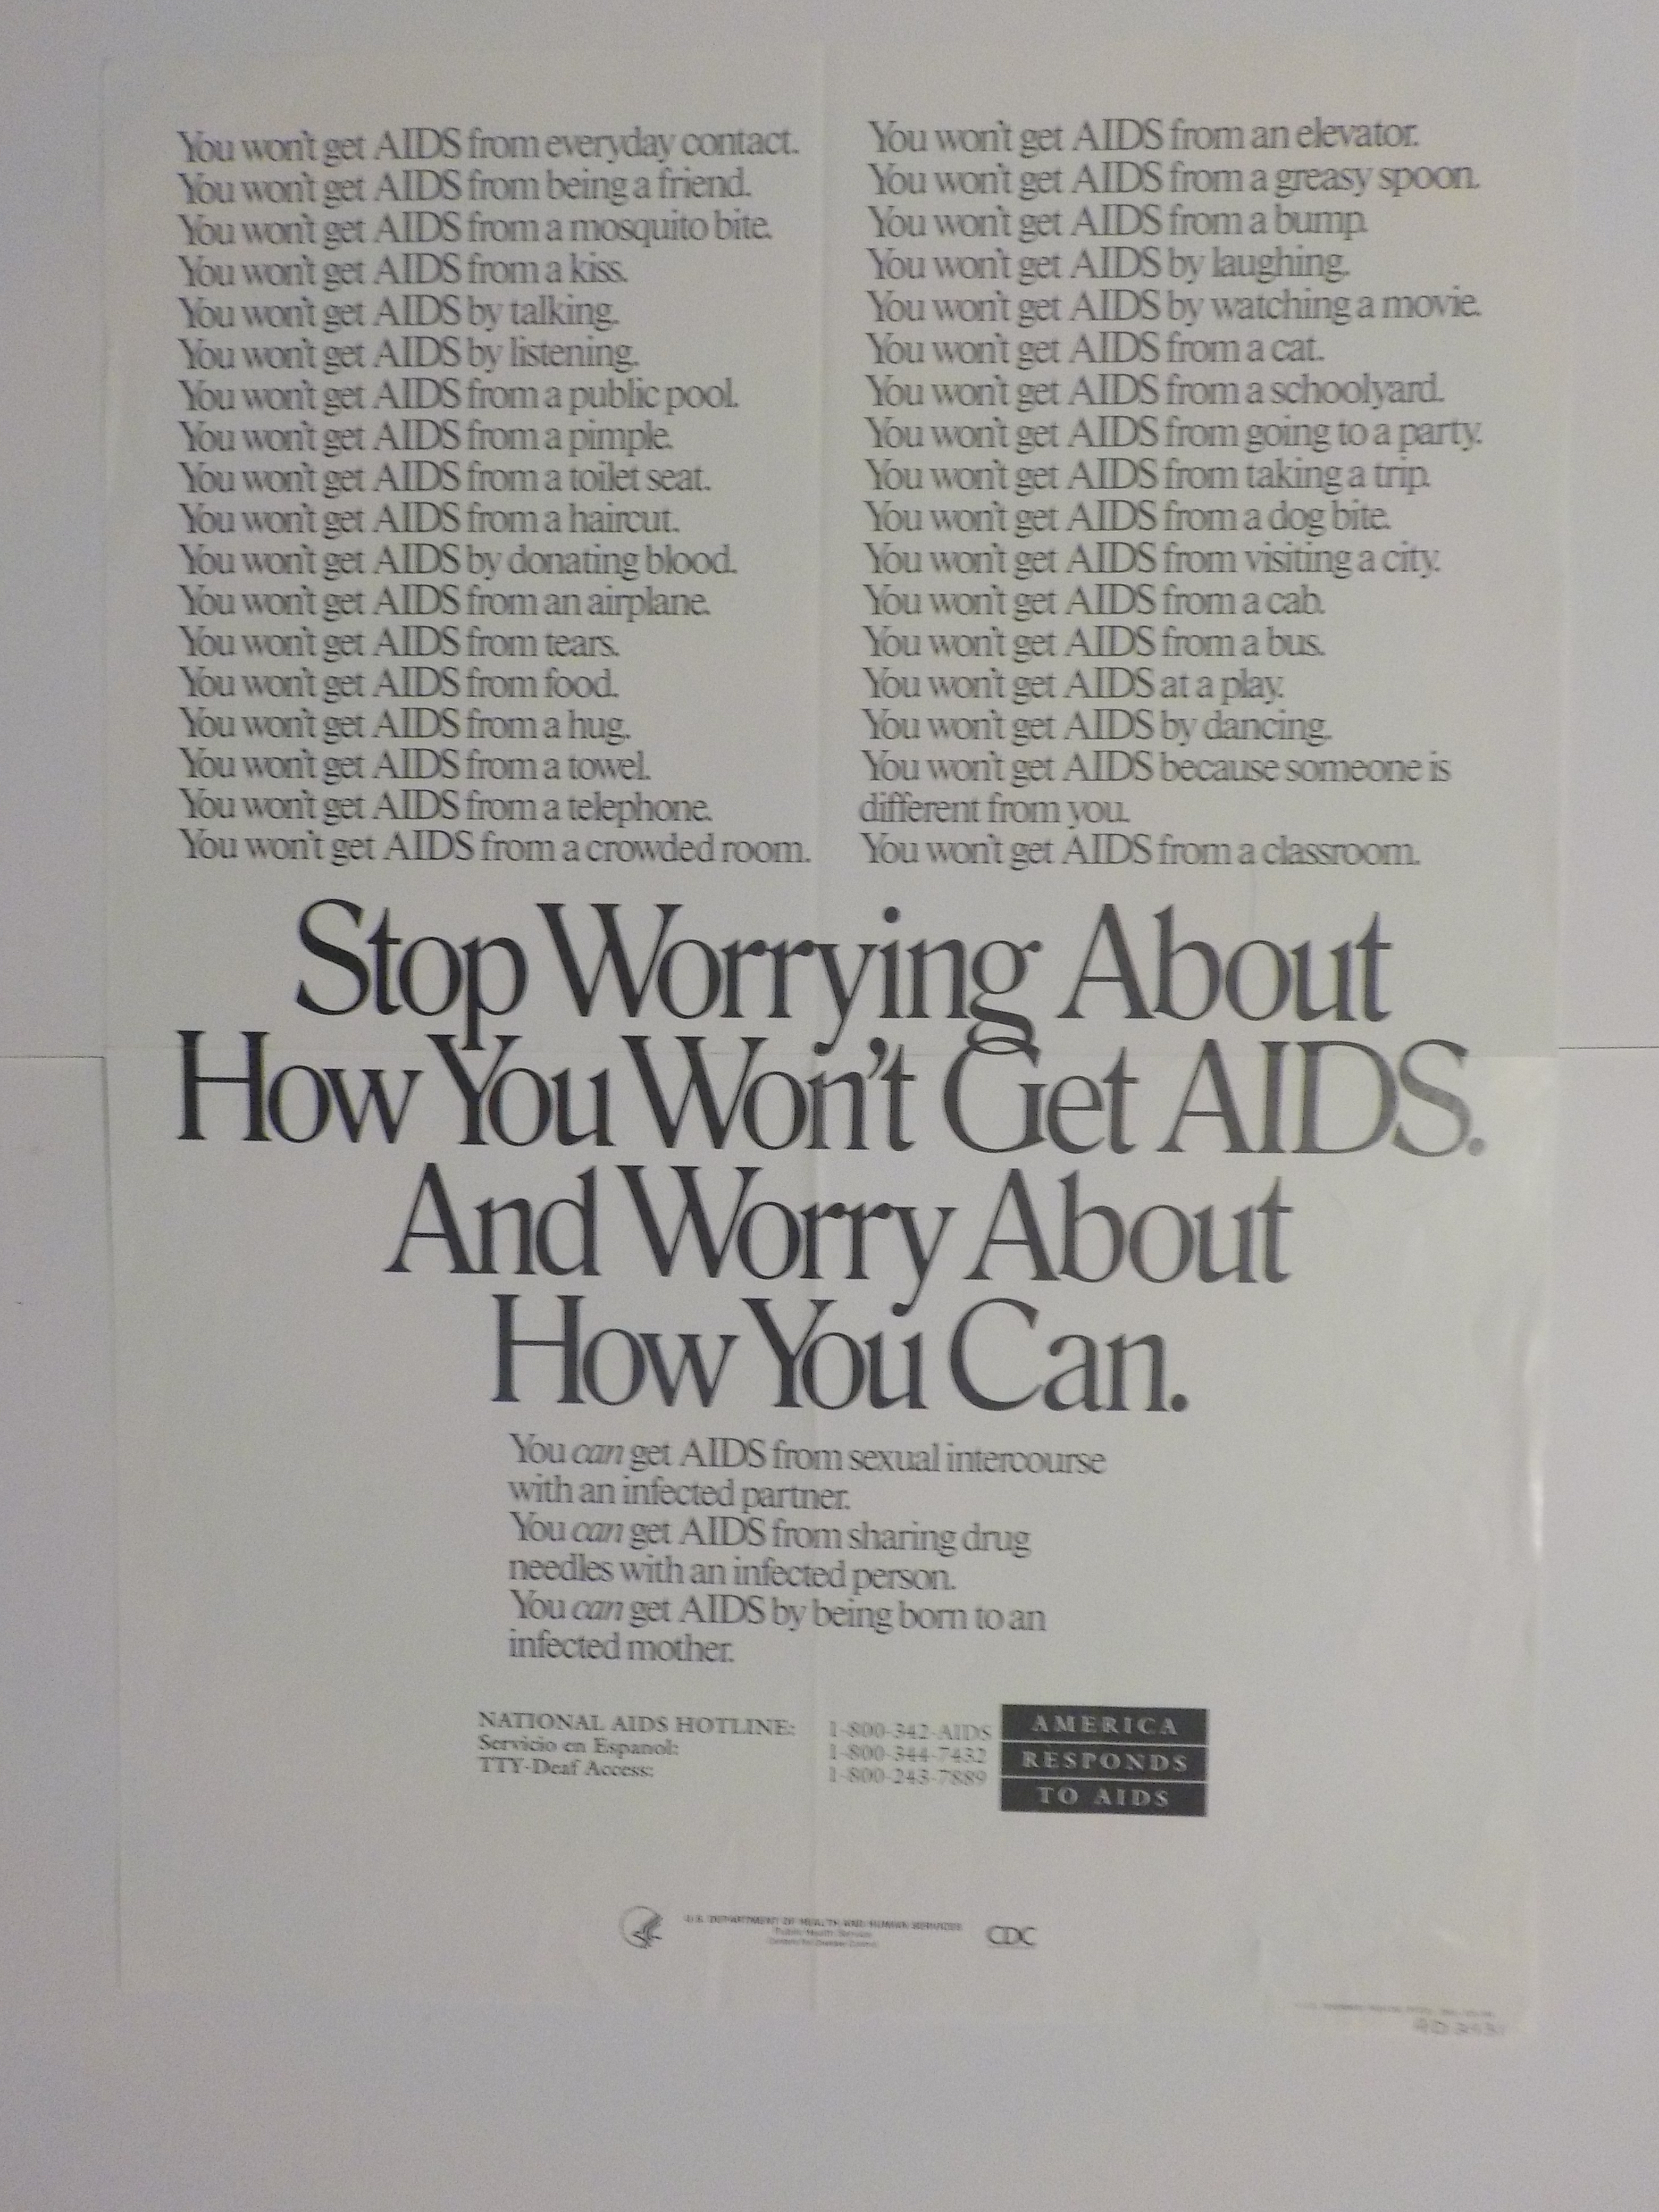 Stop worrying about how you won't get AIDS and start worrying about how you can